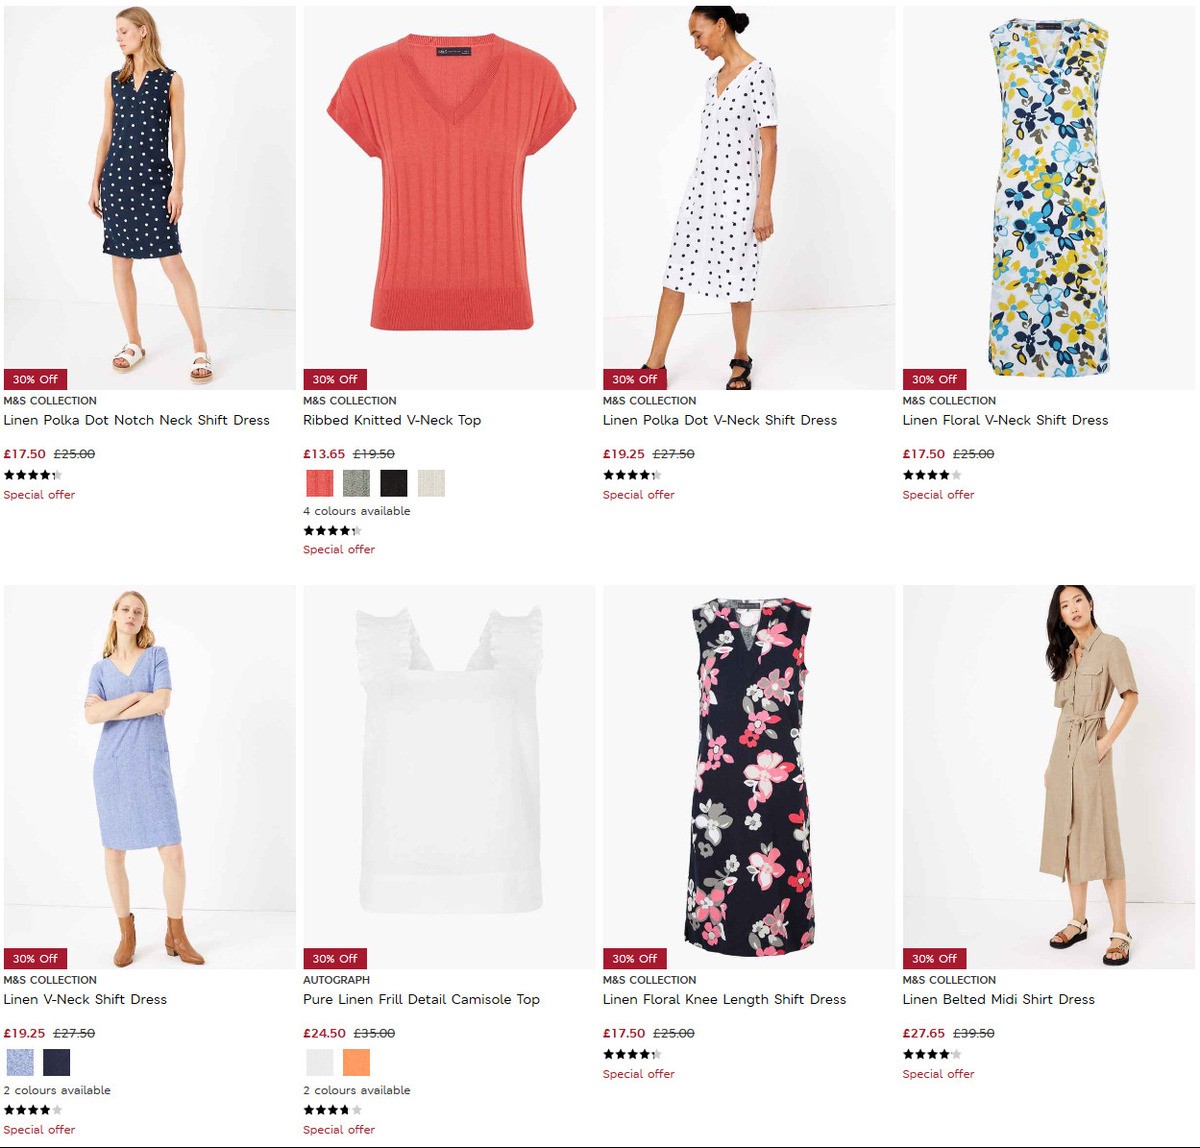 M&S Marks and Spencer Offers from 14 July